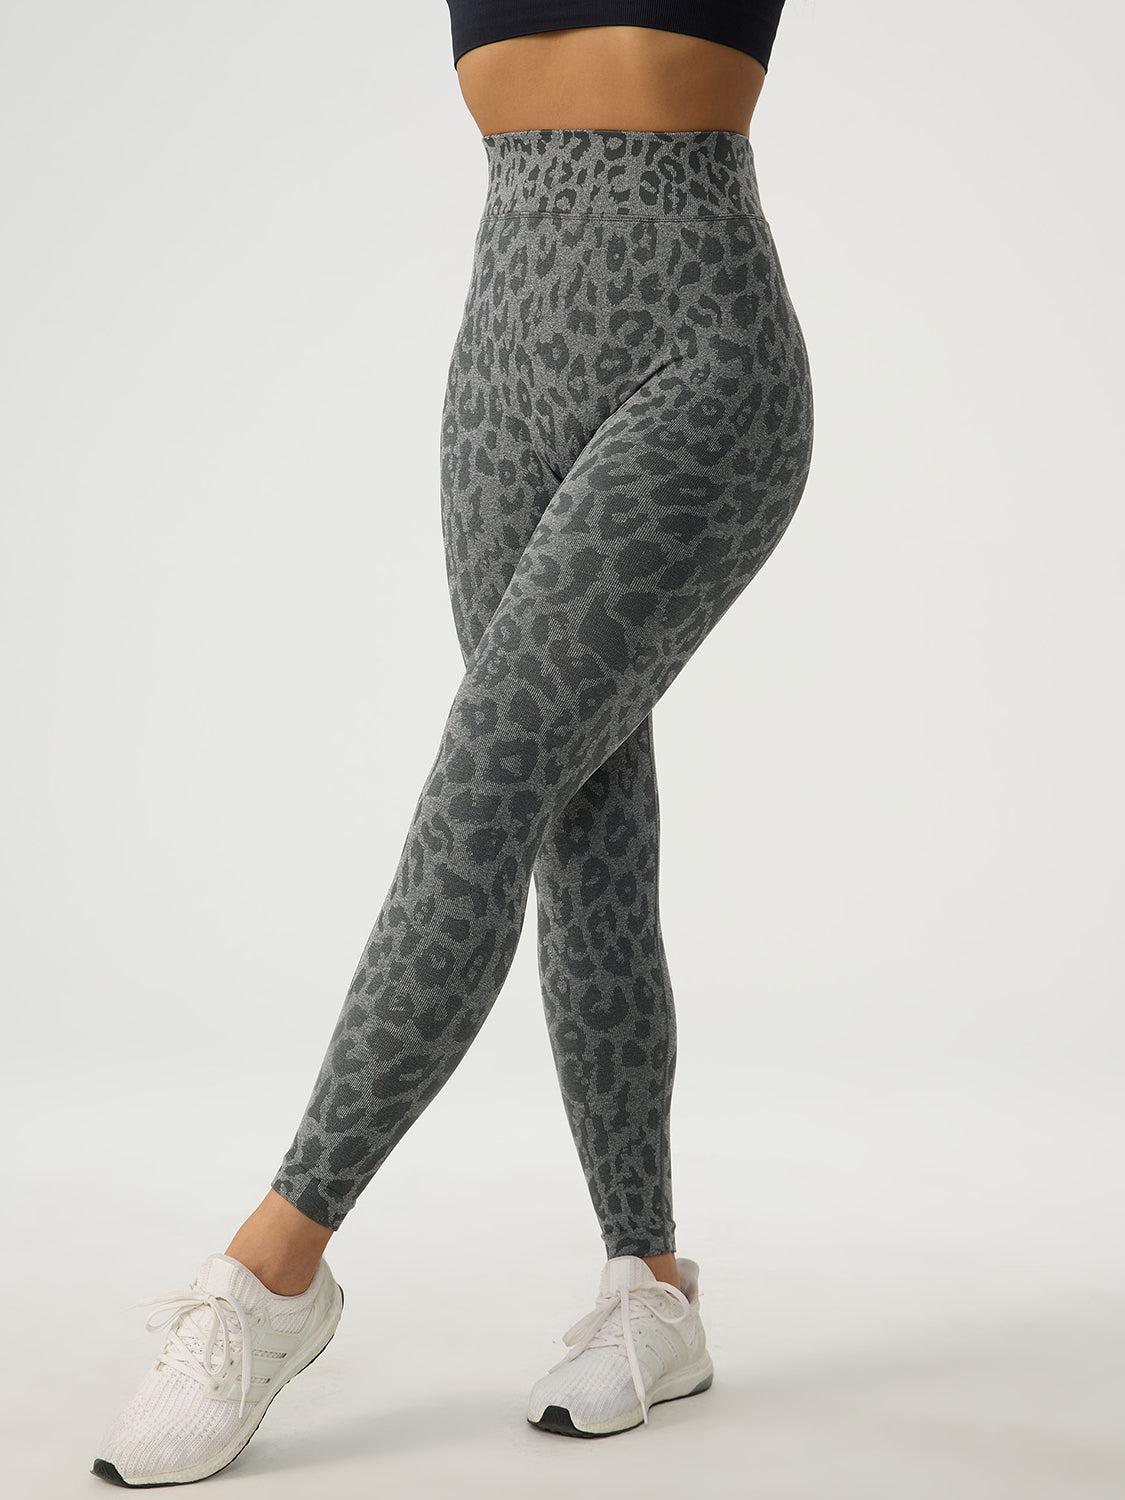 a woman in a black top and grey leopard print leggings